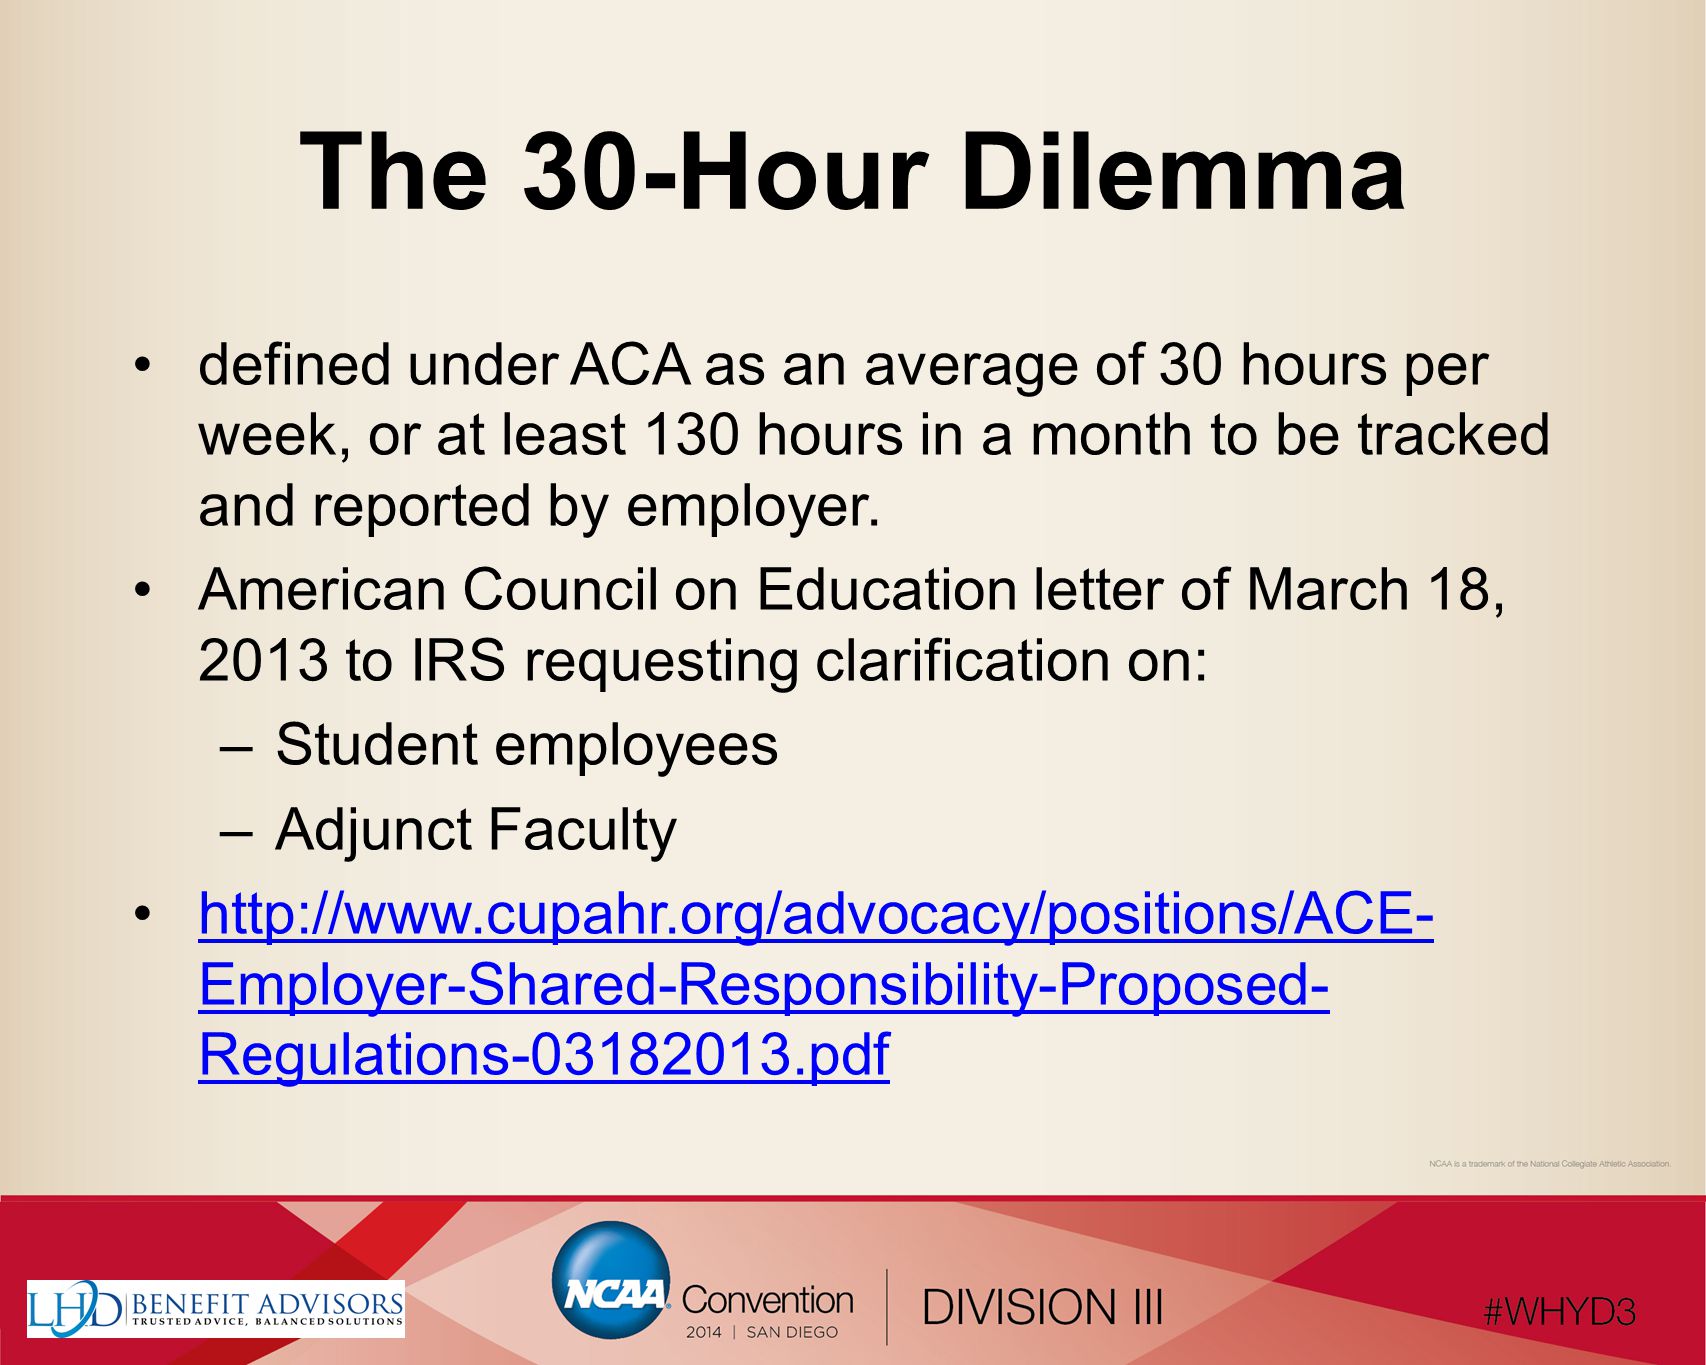 The 30-Hour Dilemma defined under ACA as an average of 30 hours per week, or at least 130 hours in a month to be tracked and reported by employer.